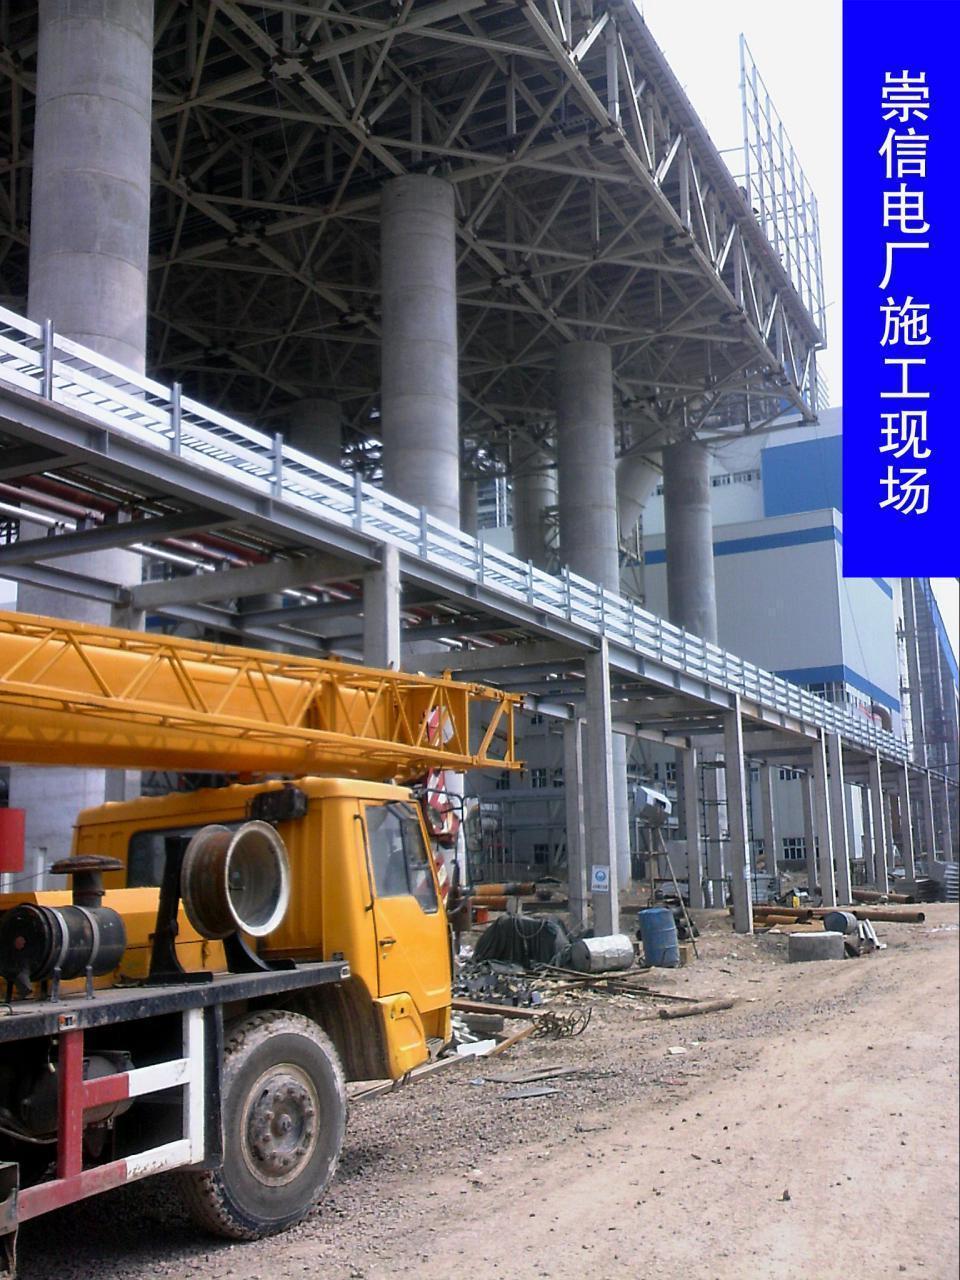 testing-the-working-conditions-for-compressor-system-for-national-power-plant-in-shanghai-3